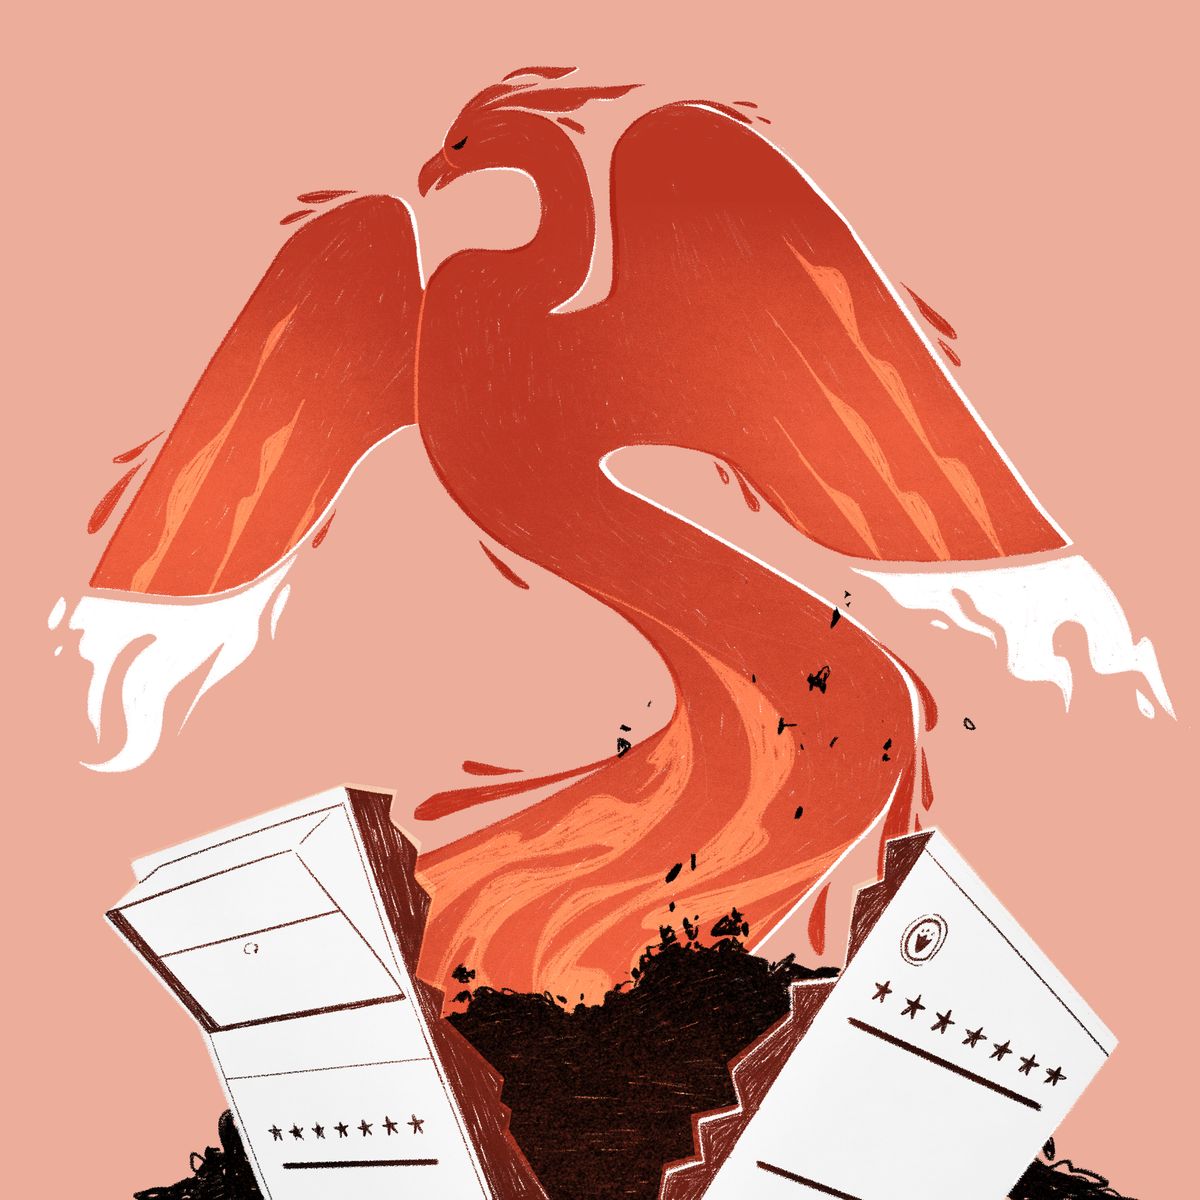 illustration of a red phoenix with blazing wings emerges from ashes and a cracked ballot box background is a pale pink